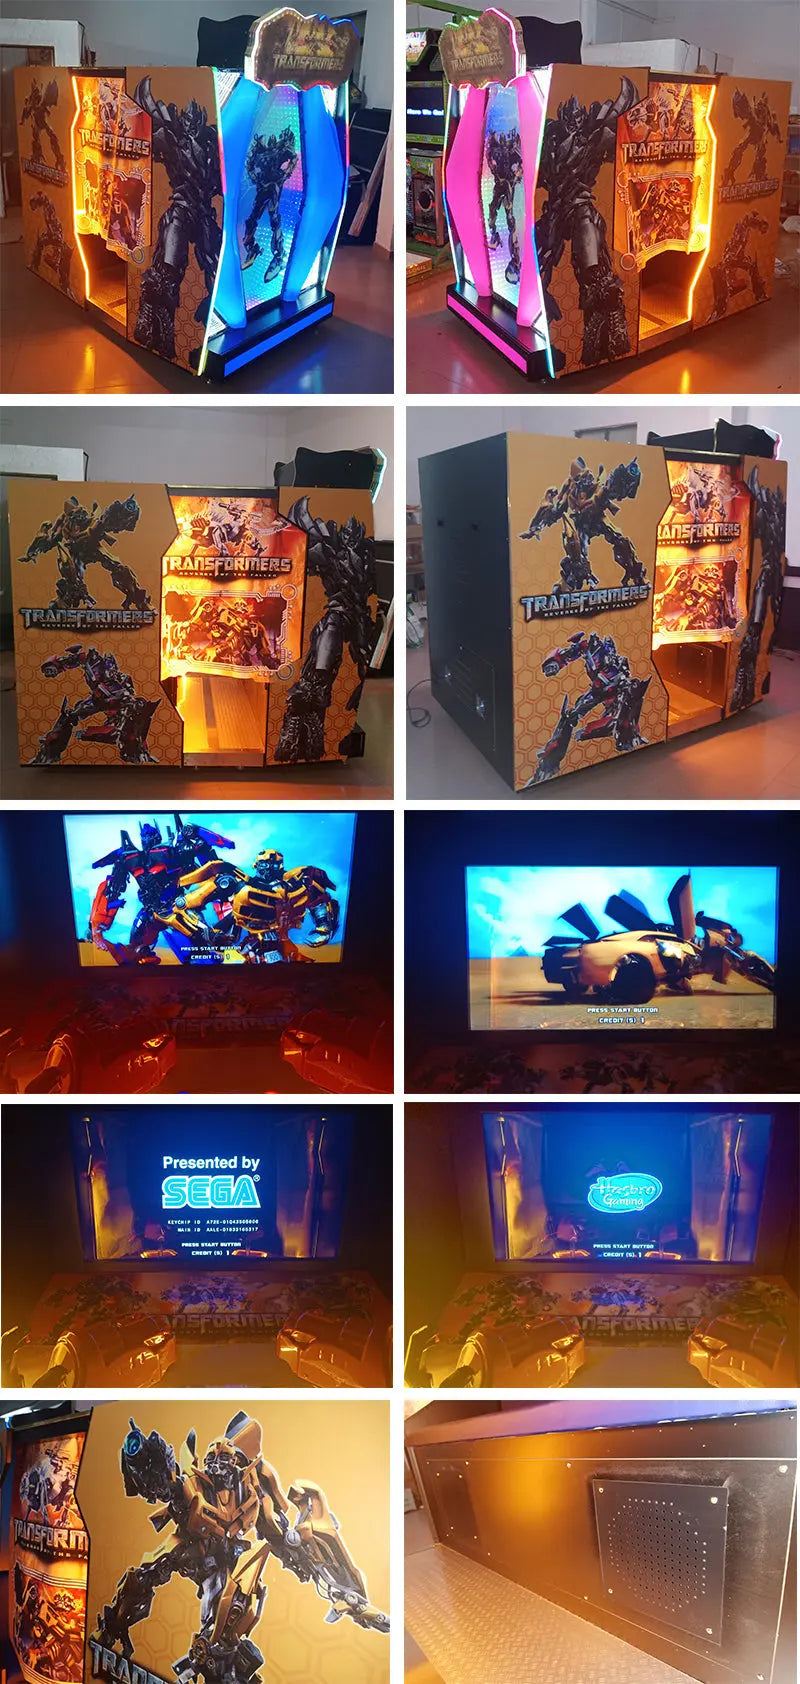 Transformers-Shooting-Game-Machine-55-inch-2-Players-Video-coin-operated-Arcade-Games-Tomy-Arcade